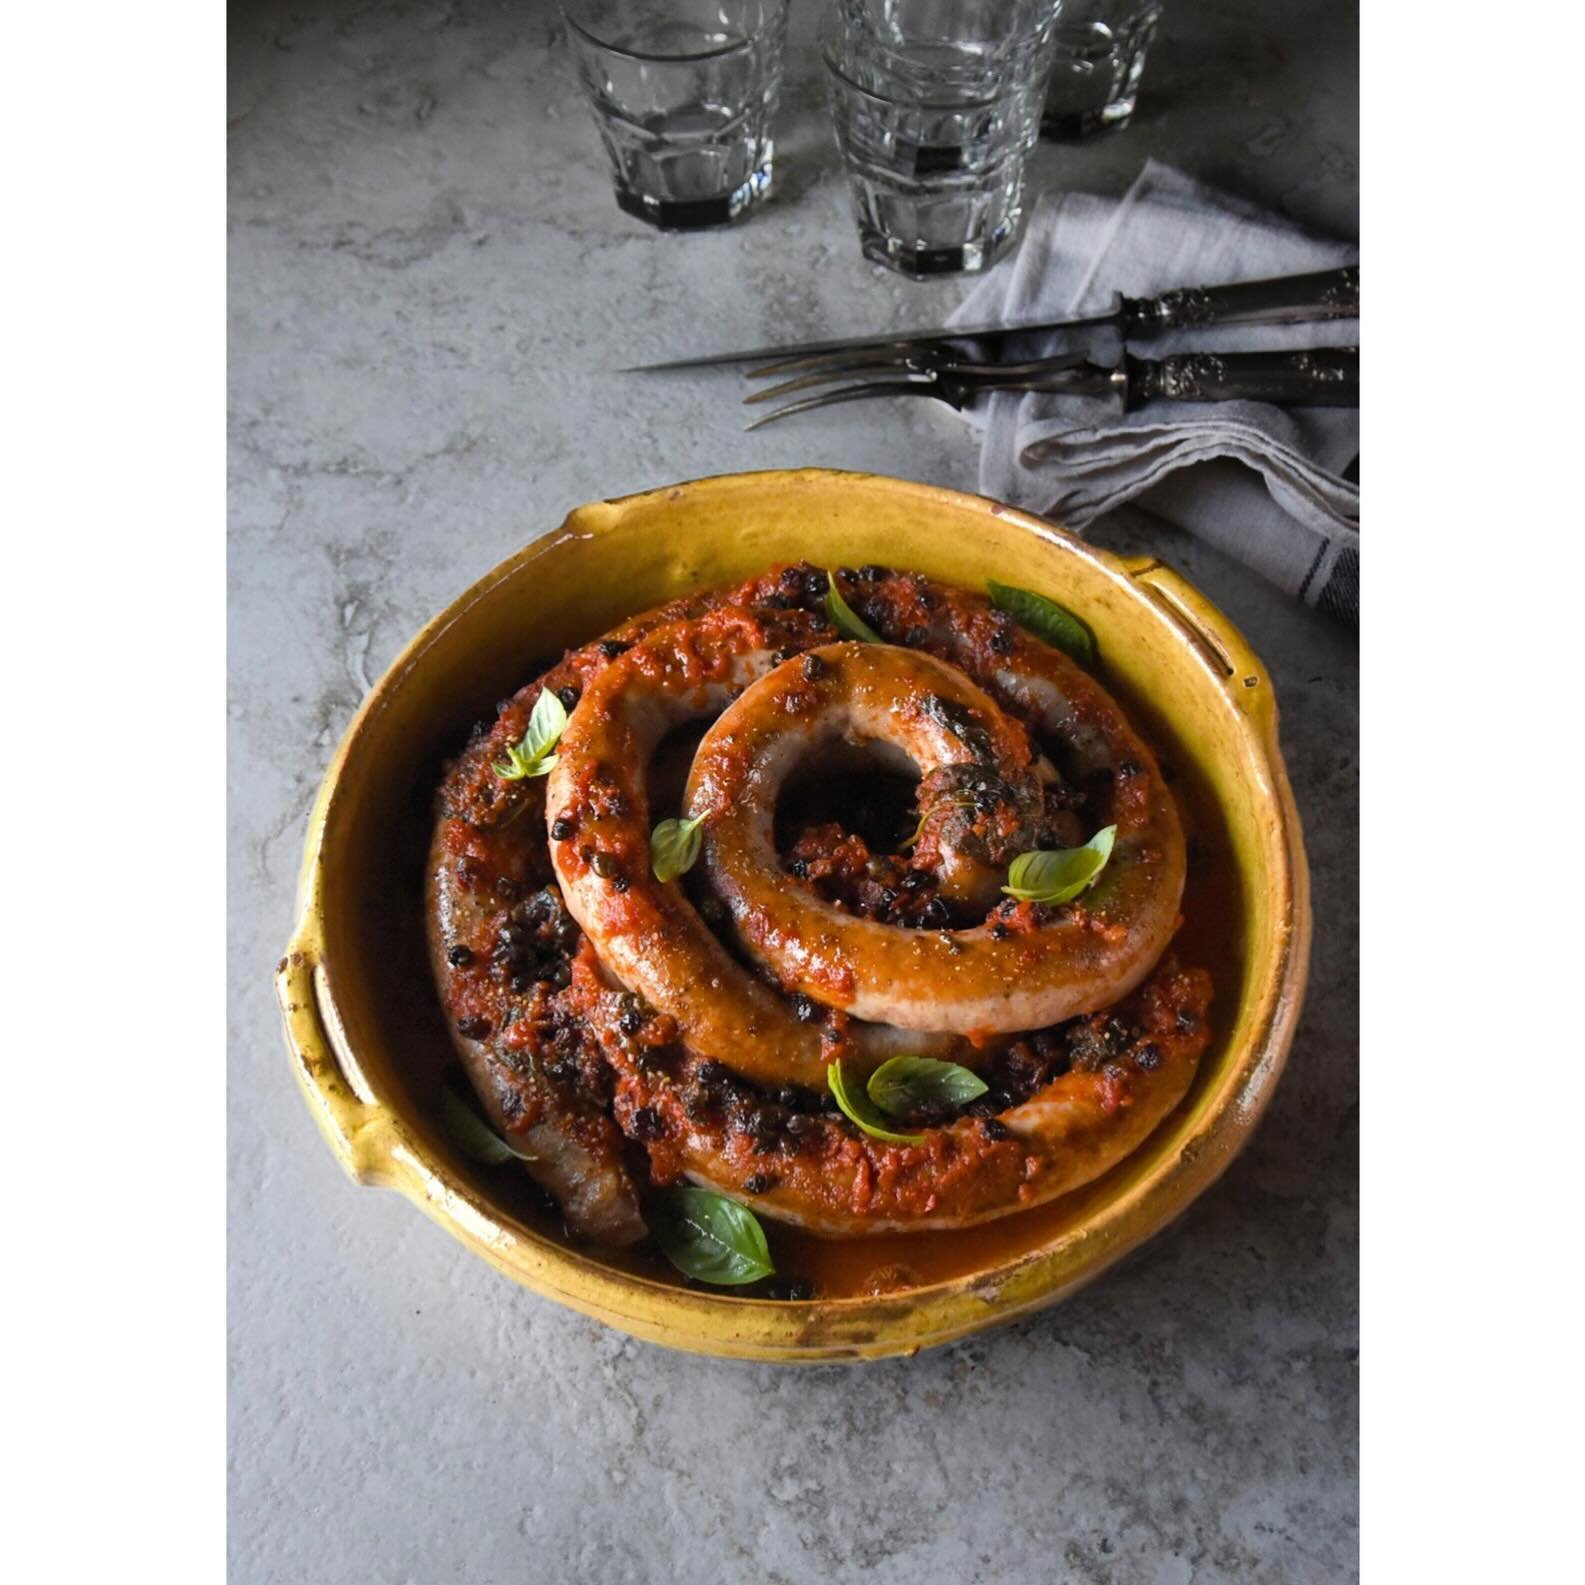 Becoming a family favourite, @salumiaustralia 
coiled pork and fennel sausage cooked in a tomato, currant, basil and fried caper sauce. 
Gorgeous served with polenta and a mixture of gently saut&eacute;ed greens with a good hit of chilli and anchovie